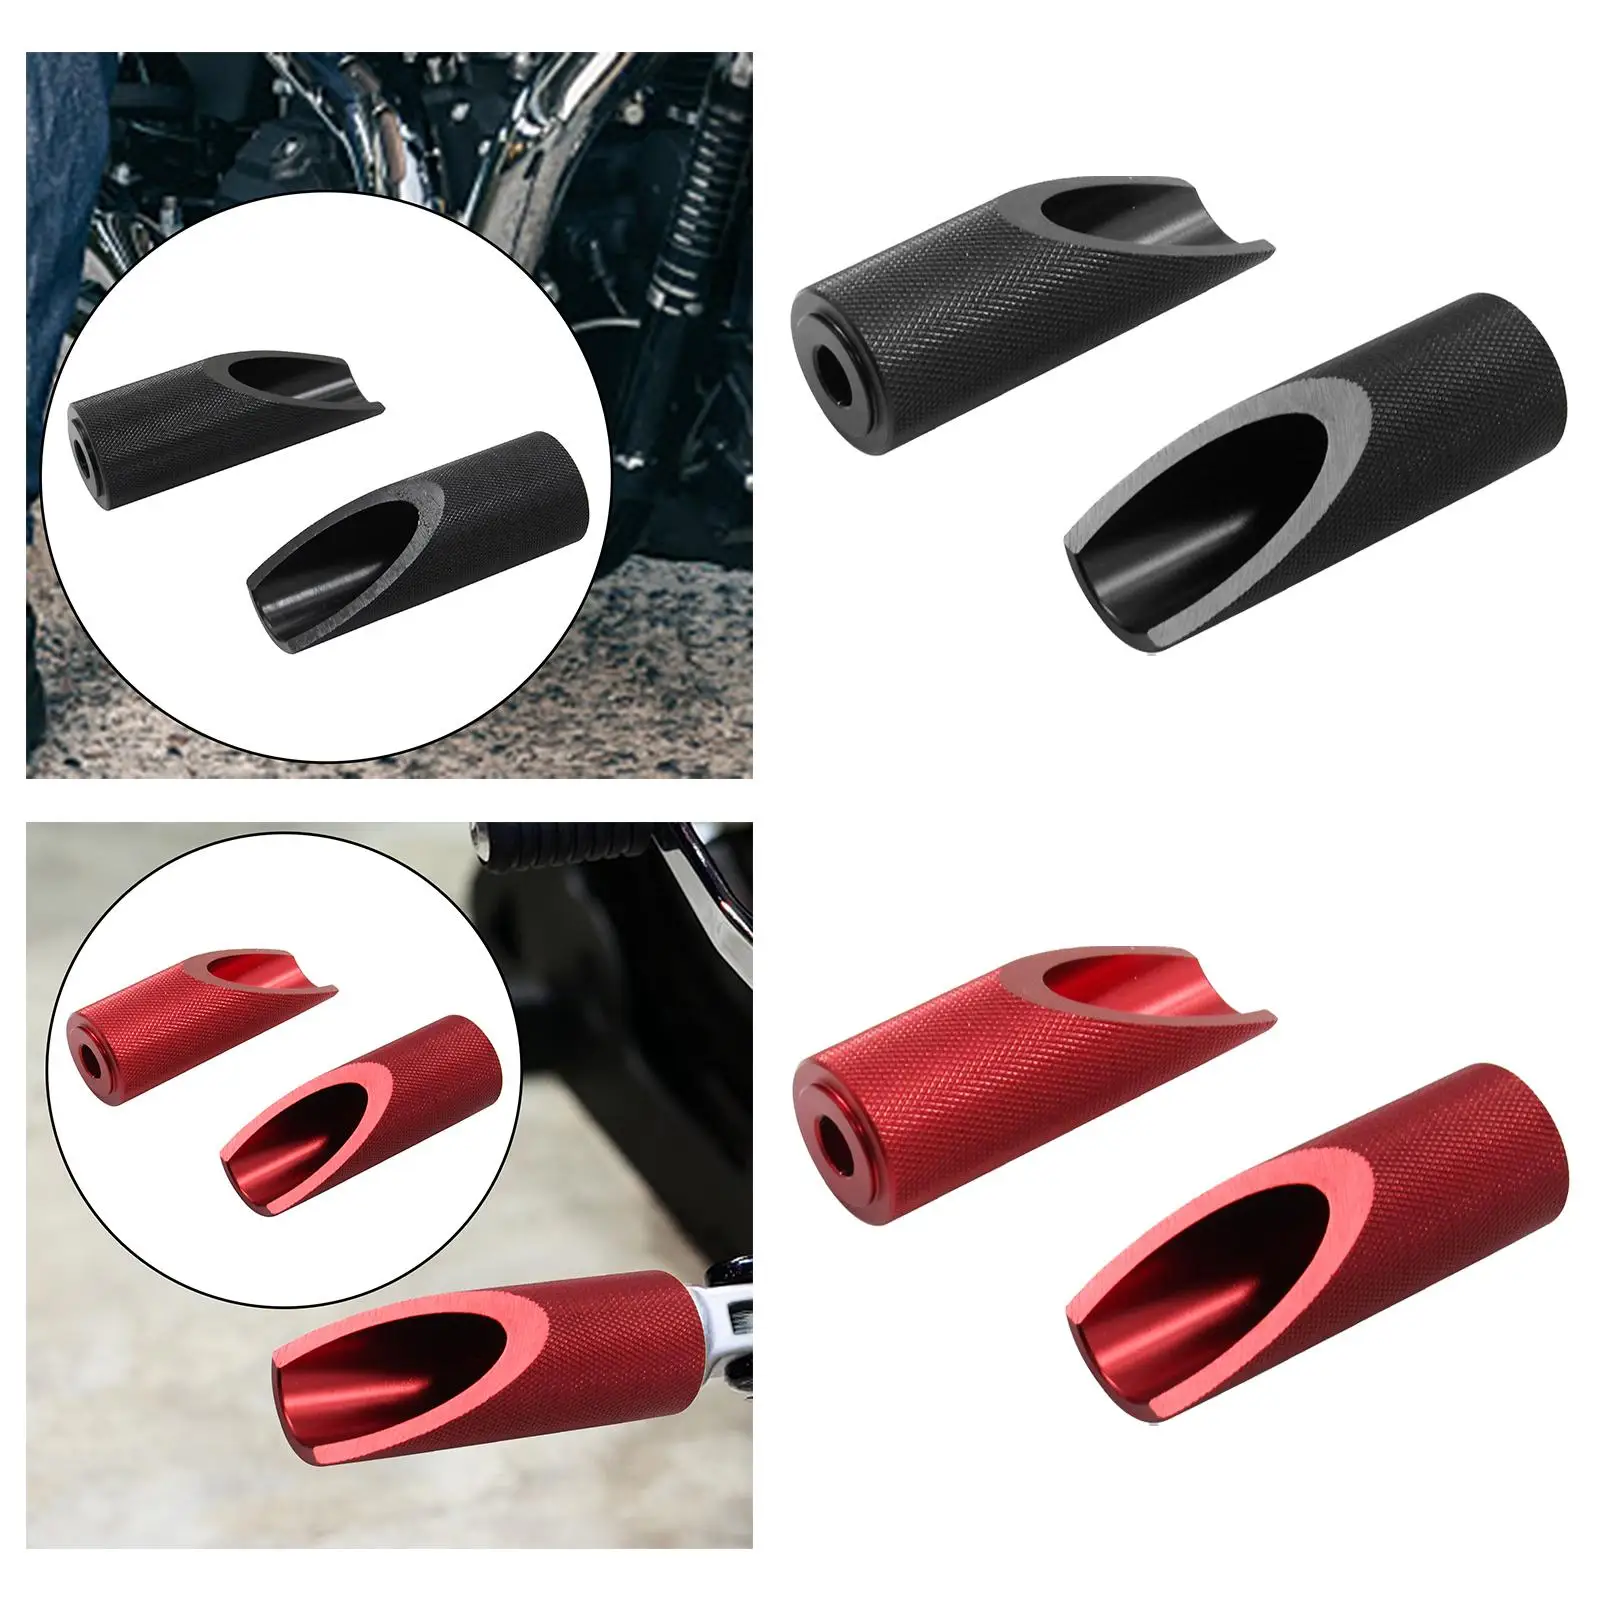 Motorcycle Highway Front Foot Pegs Replaces for High Performance